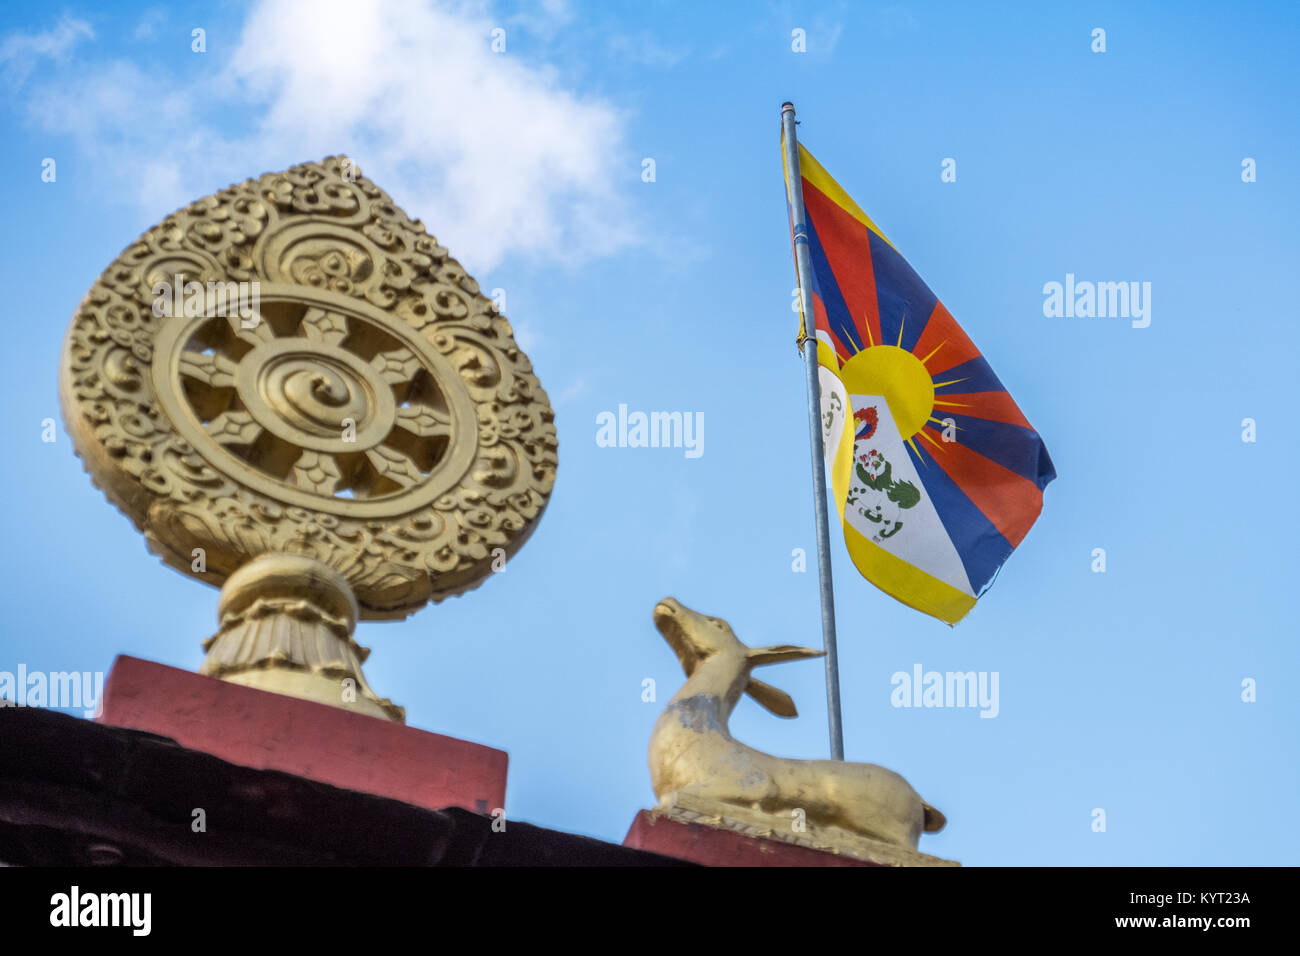 The Tibetan flag flying from the roof of a Buddhist temple in Daramshala, India Stock Photo